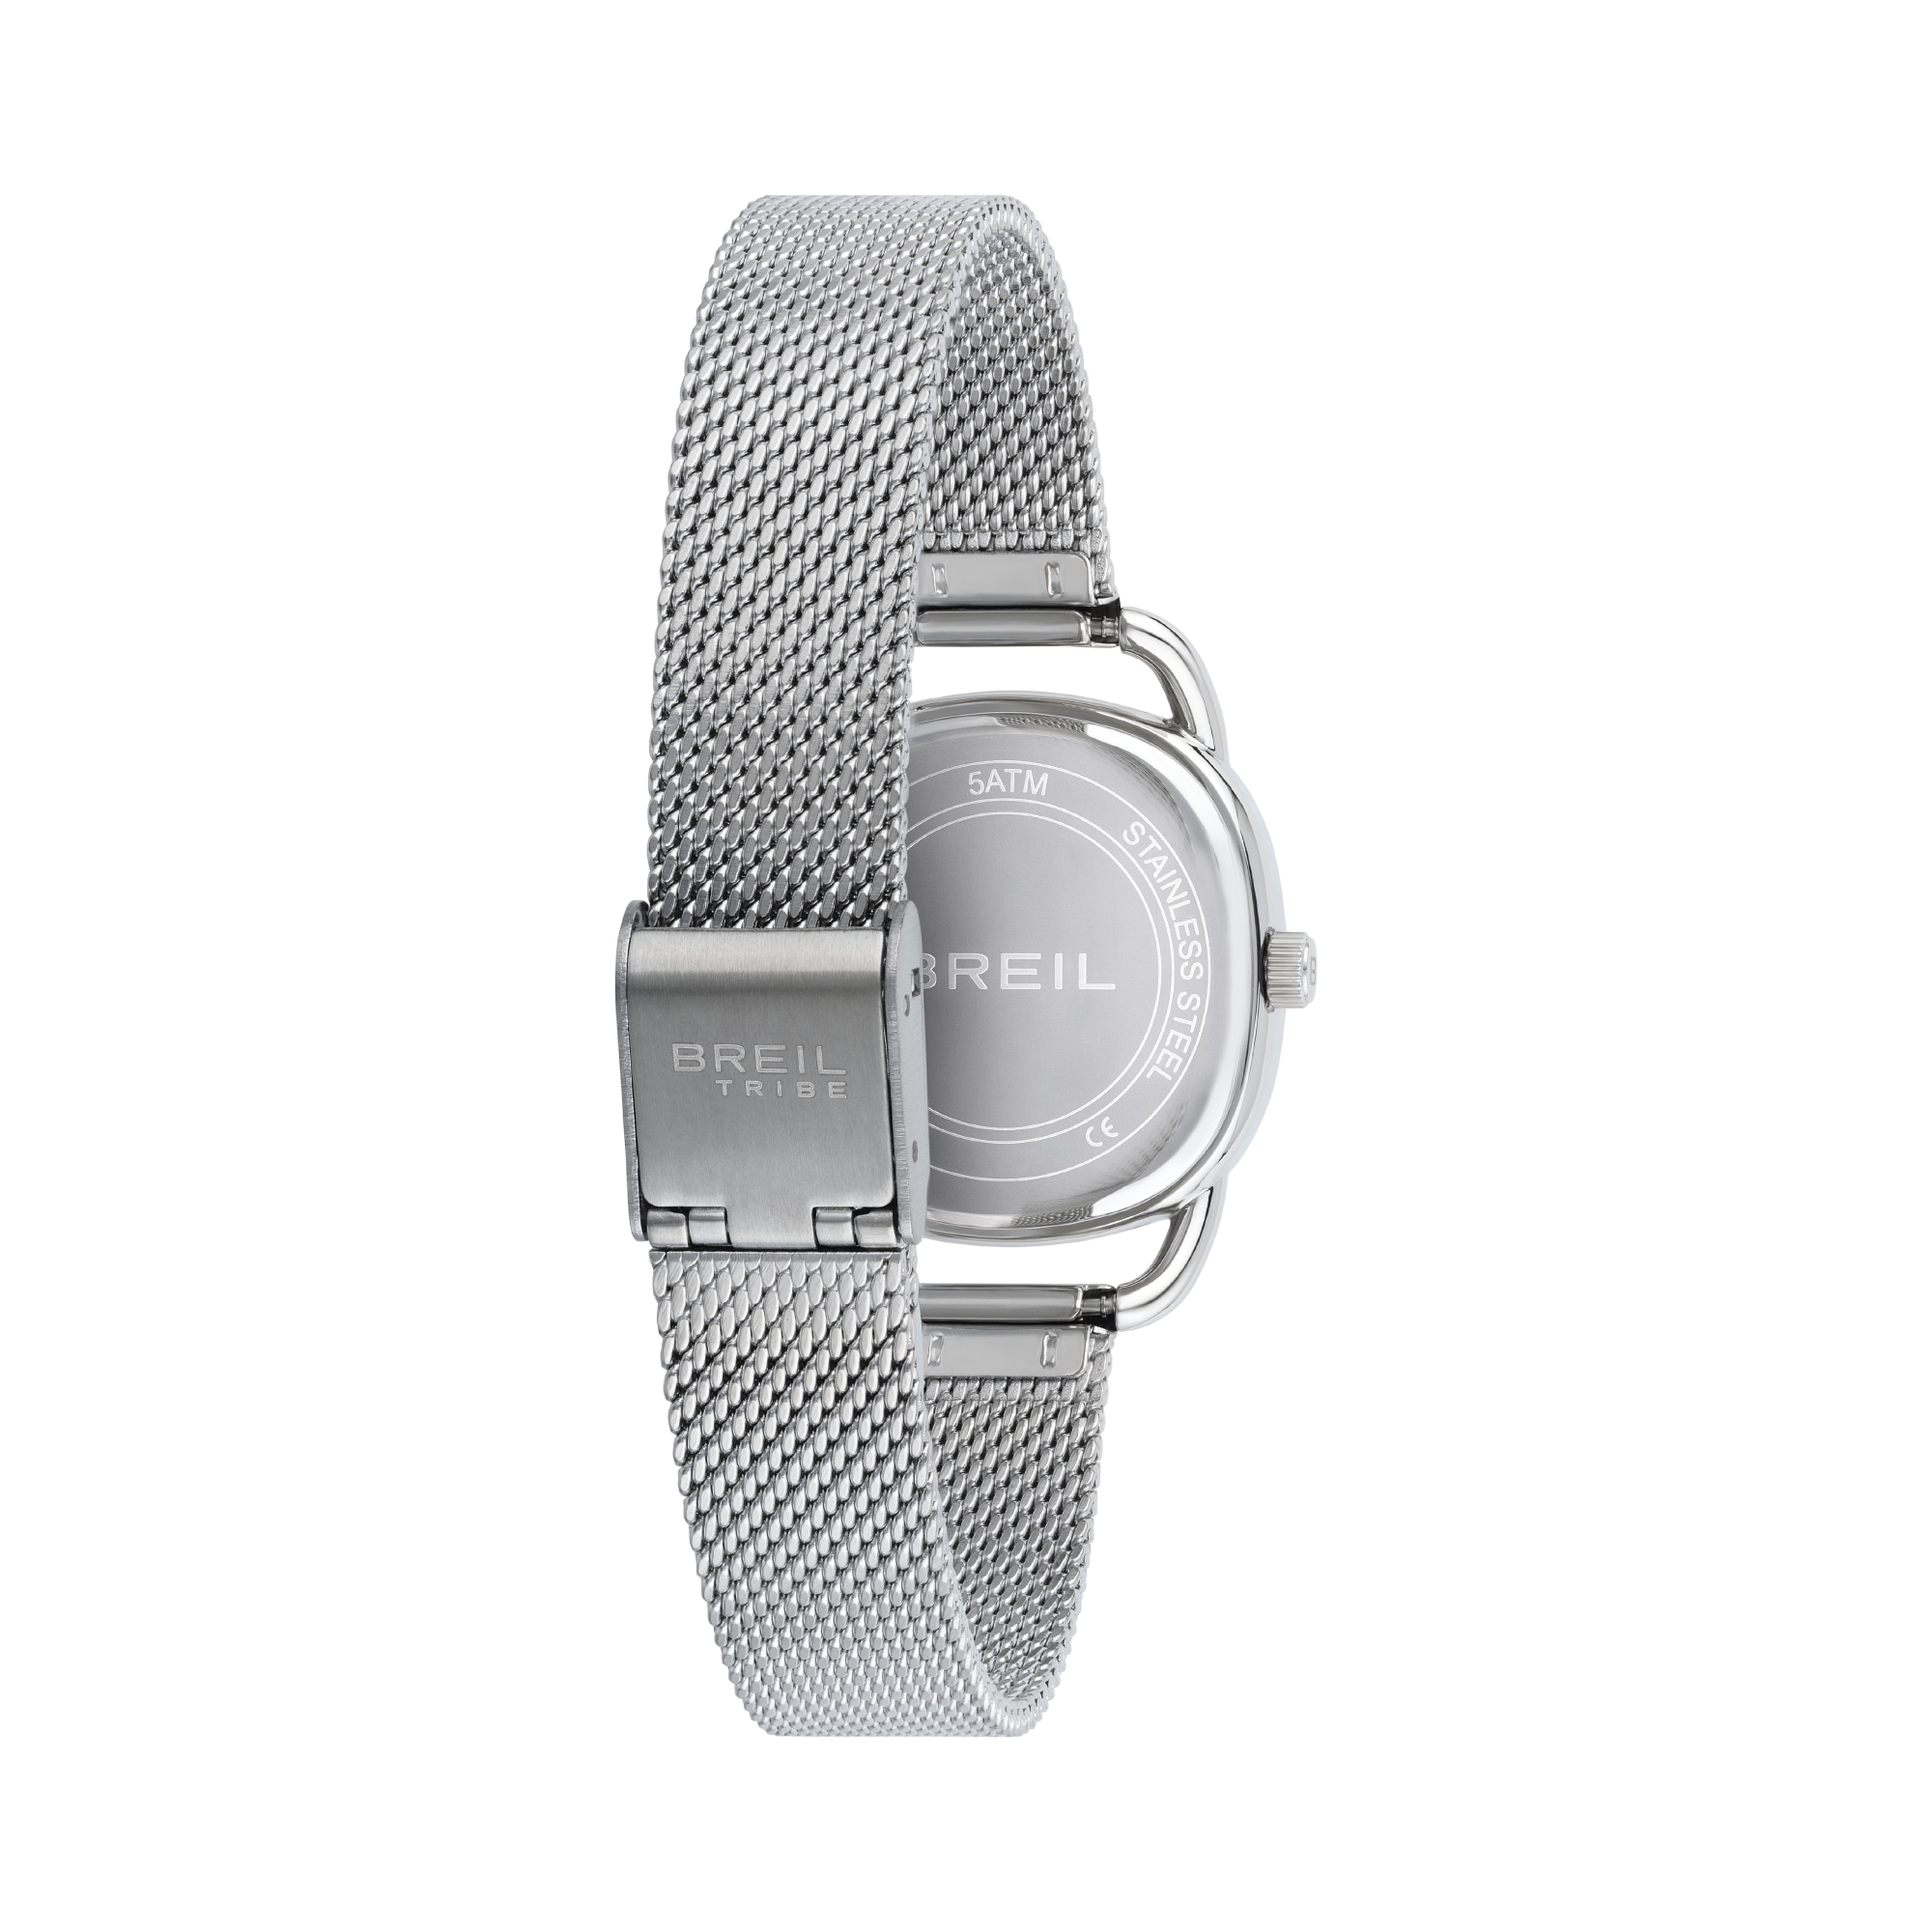 PENELOPE - TIME ONLY LADY 28X28 MM - 2 - EW0491 | Breil